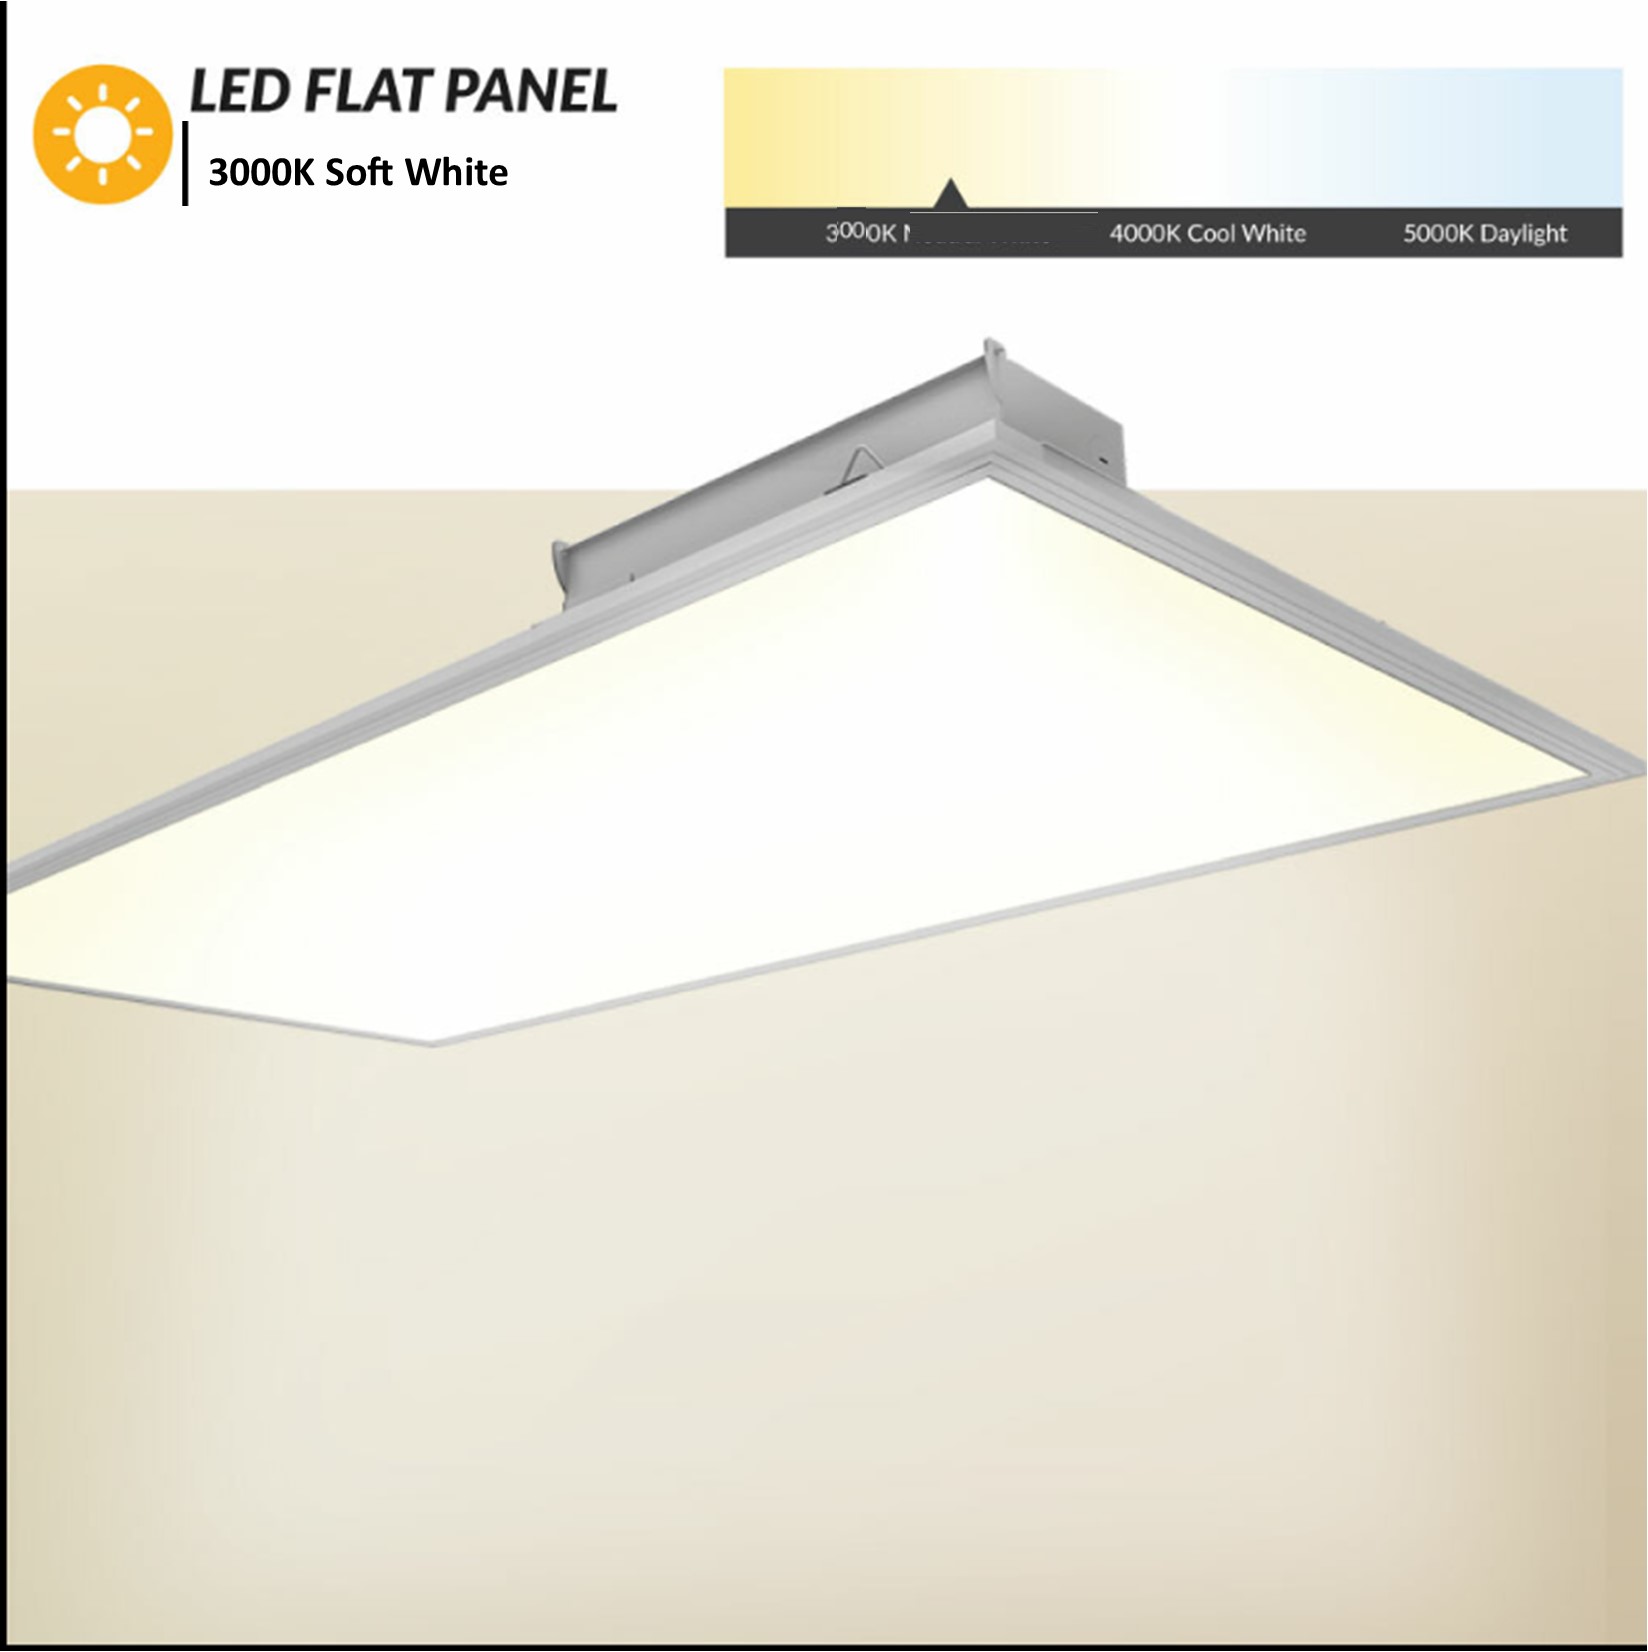 LED Flat Panel 2X4  - 3000K -  Drop Ceiling Light - Soft White - Dimmable